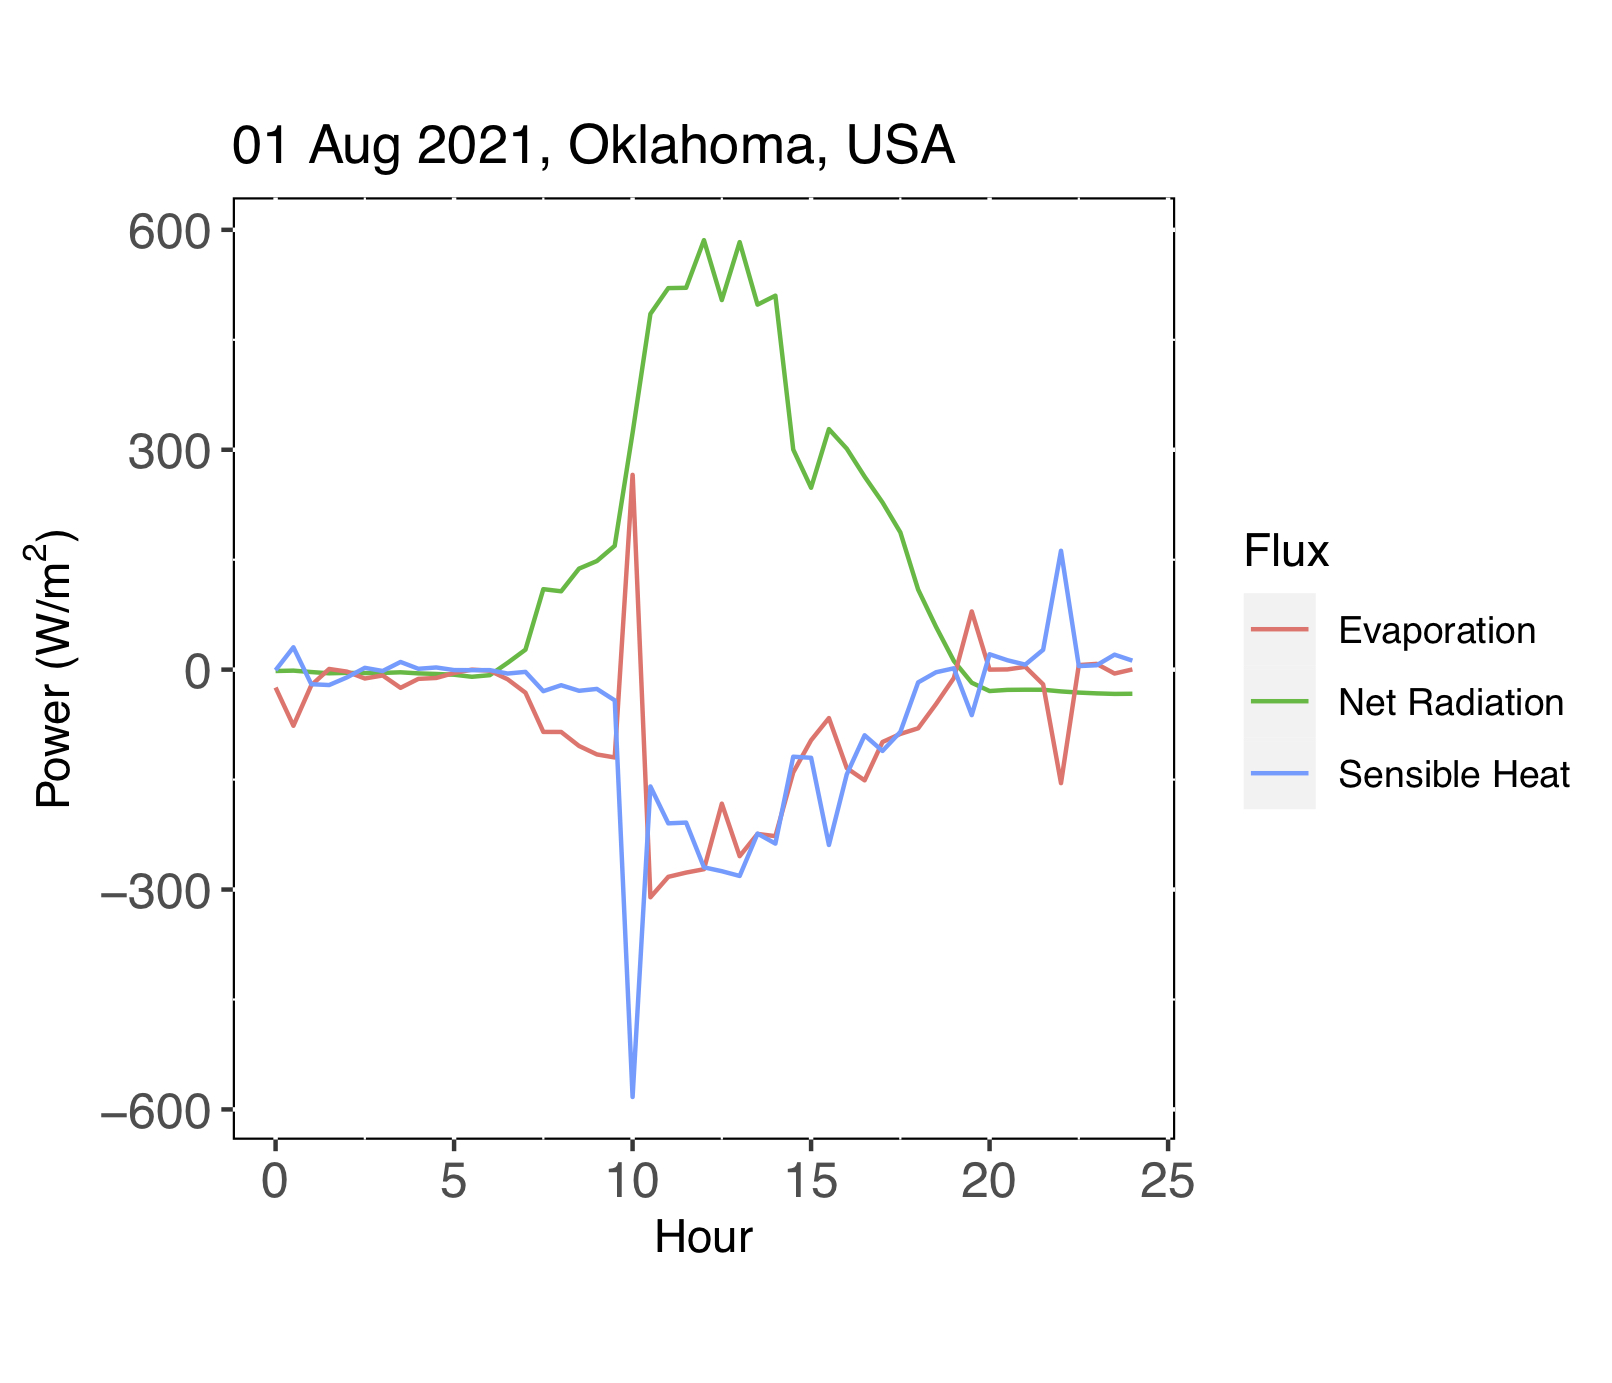 Flux measurements over one August day in Oklahoma